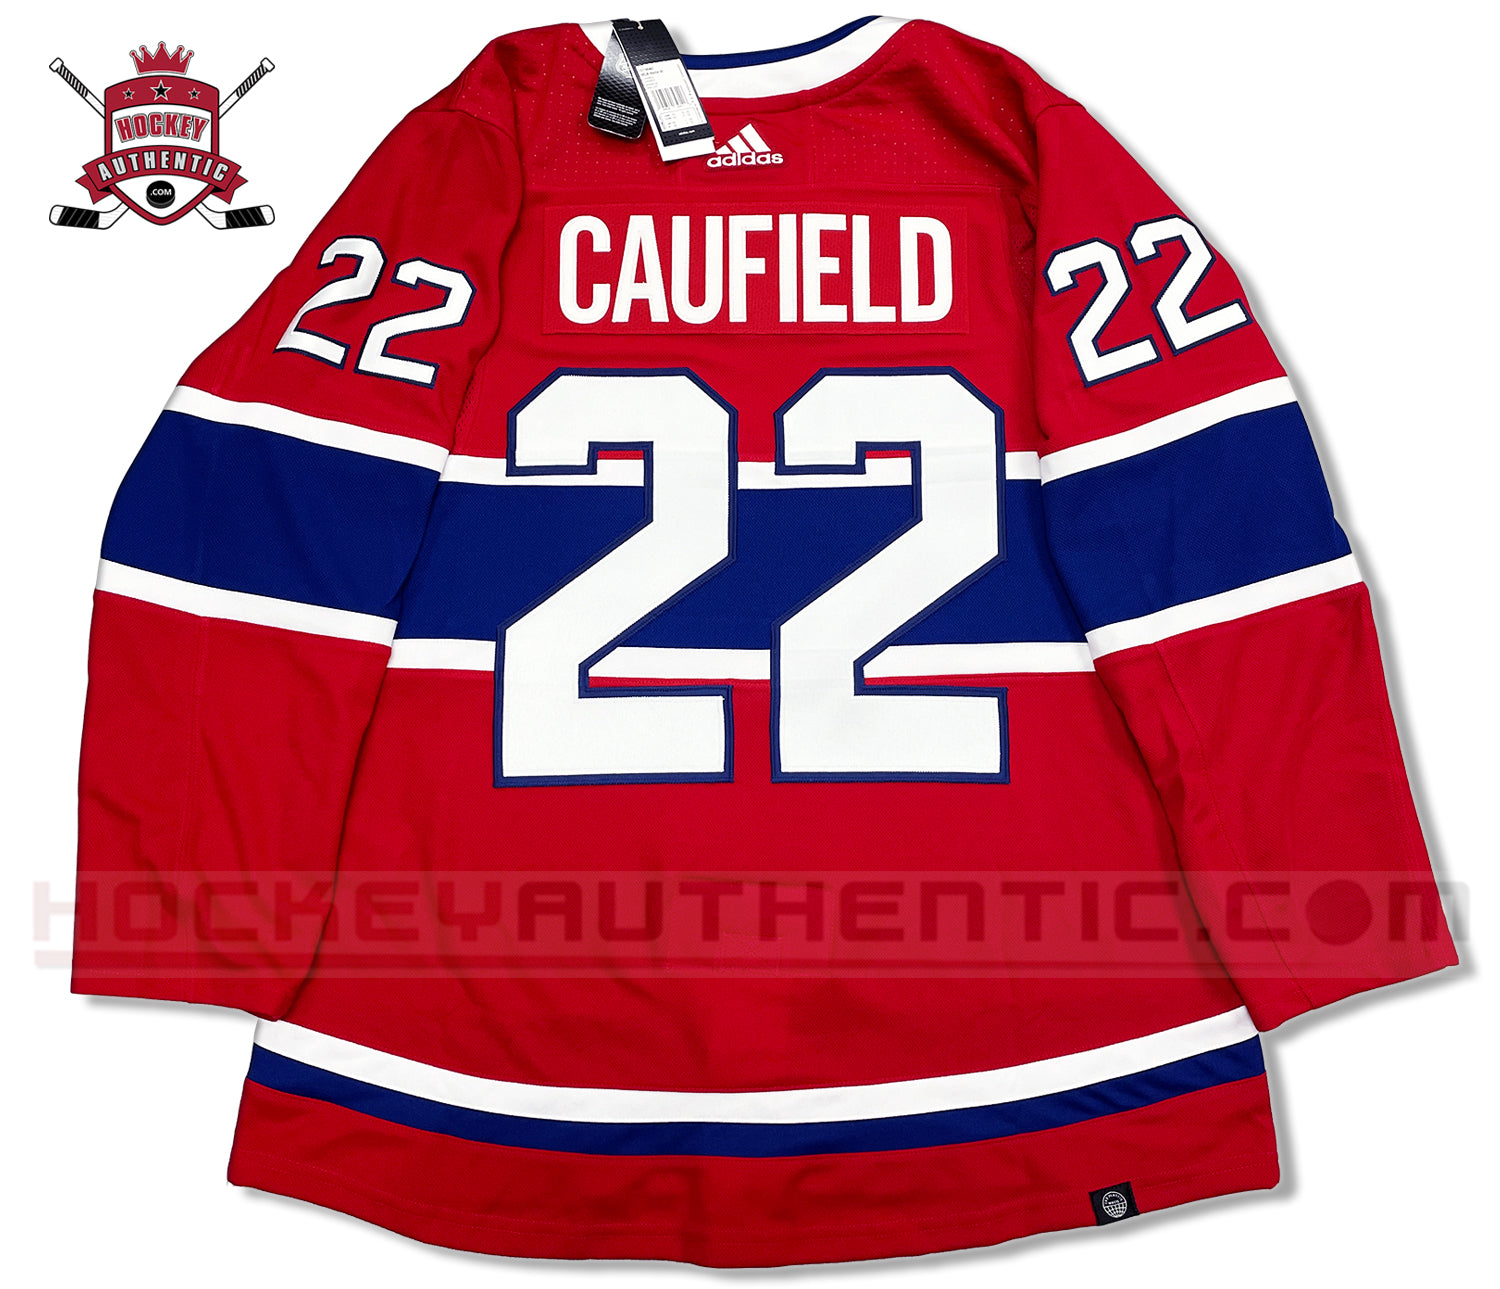 Montreal Canadiens Adidas Adizero Primegreen Authentic Red Home Jersey / Large (52)